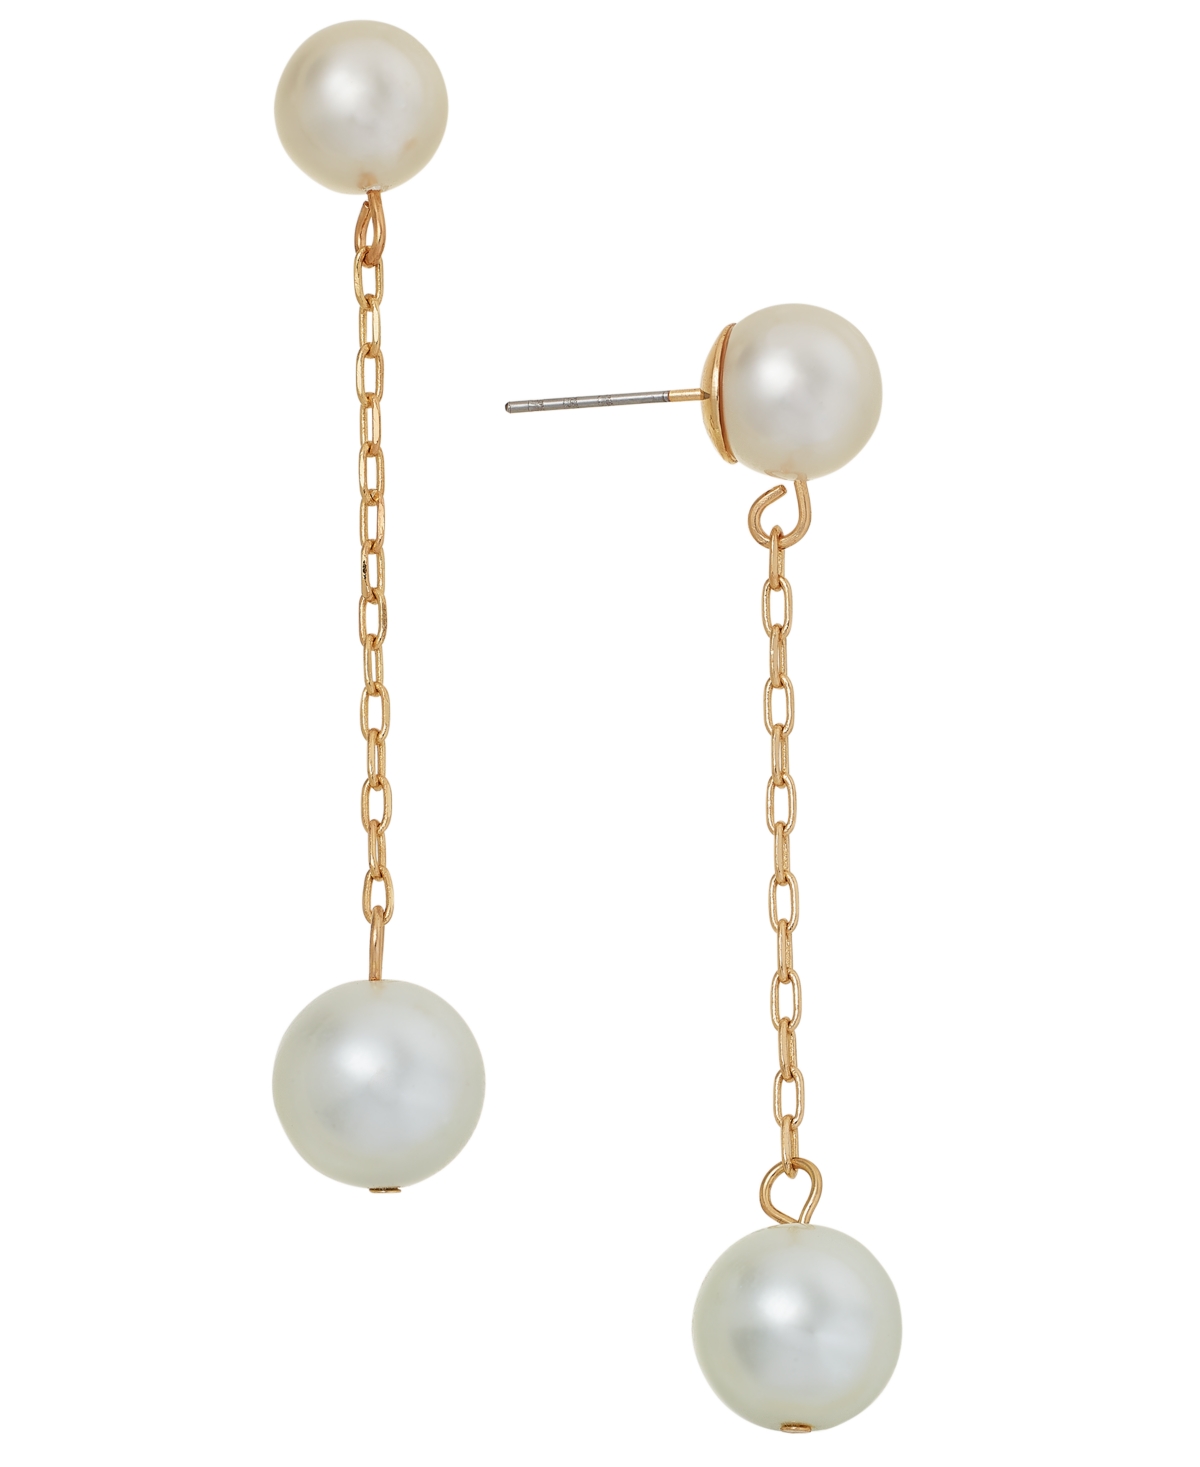 Gold-Tone Chain & Imitation Pearl Linear Drop Earrings, Created for Macy's - White